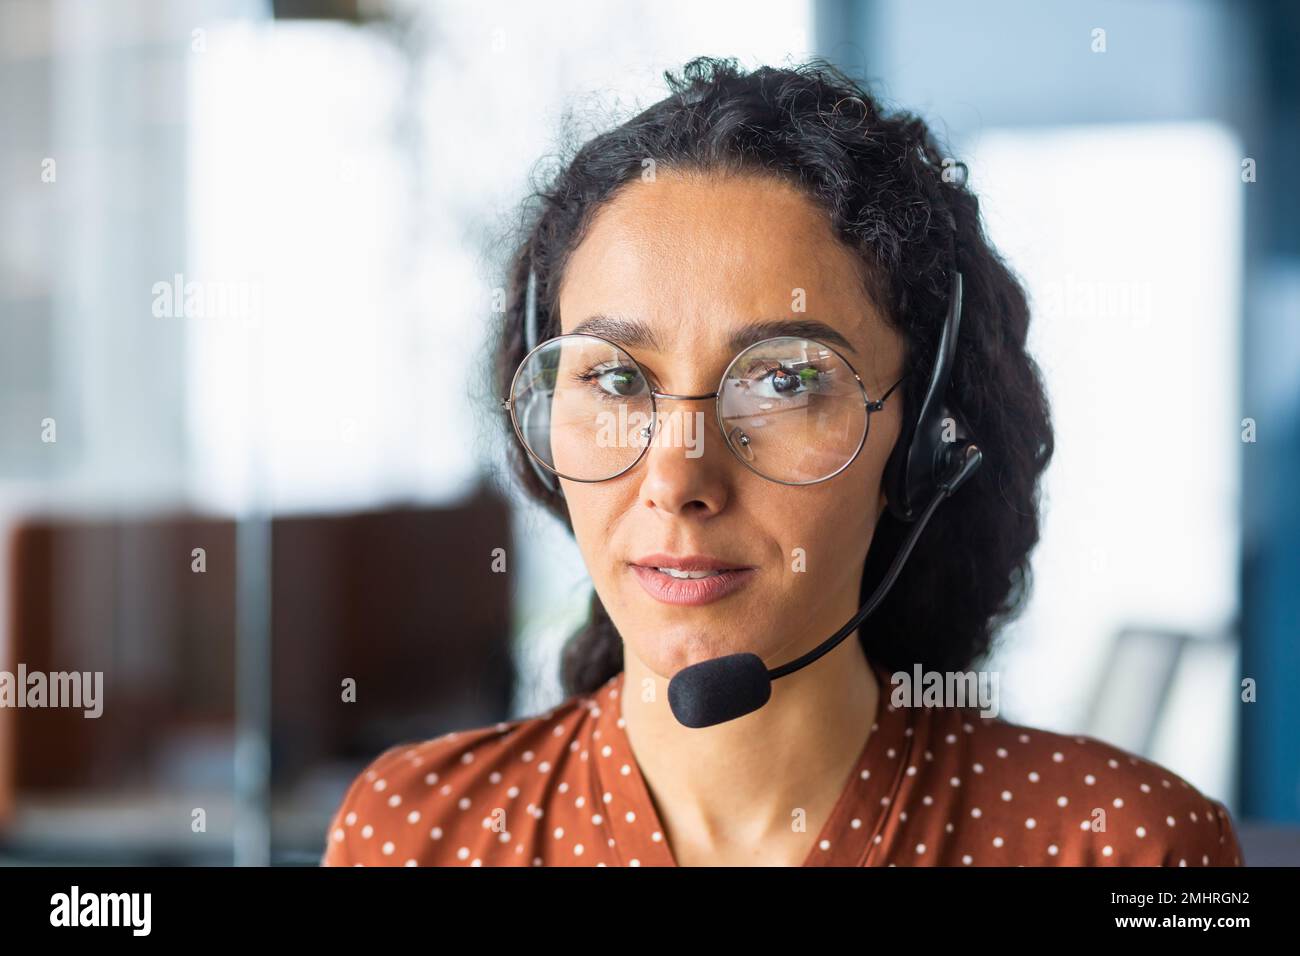 Close-up photo. Portrait of a young beautiful Latin American woman in a headset. Call center, service operator, hotline, support and assistance line. He looks seriously into the camera. Stock Photo